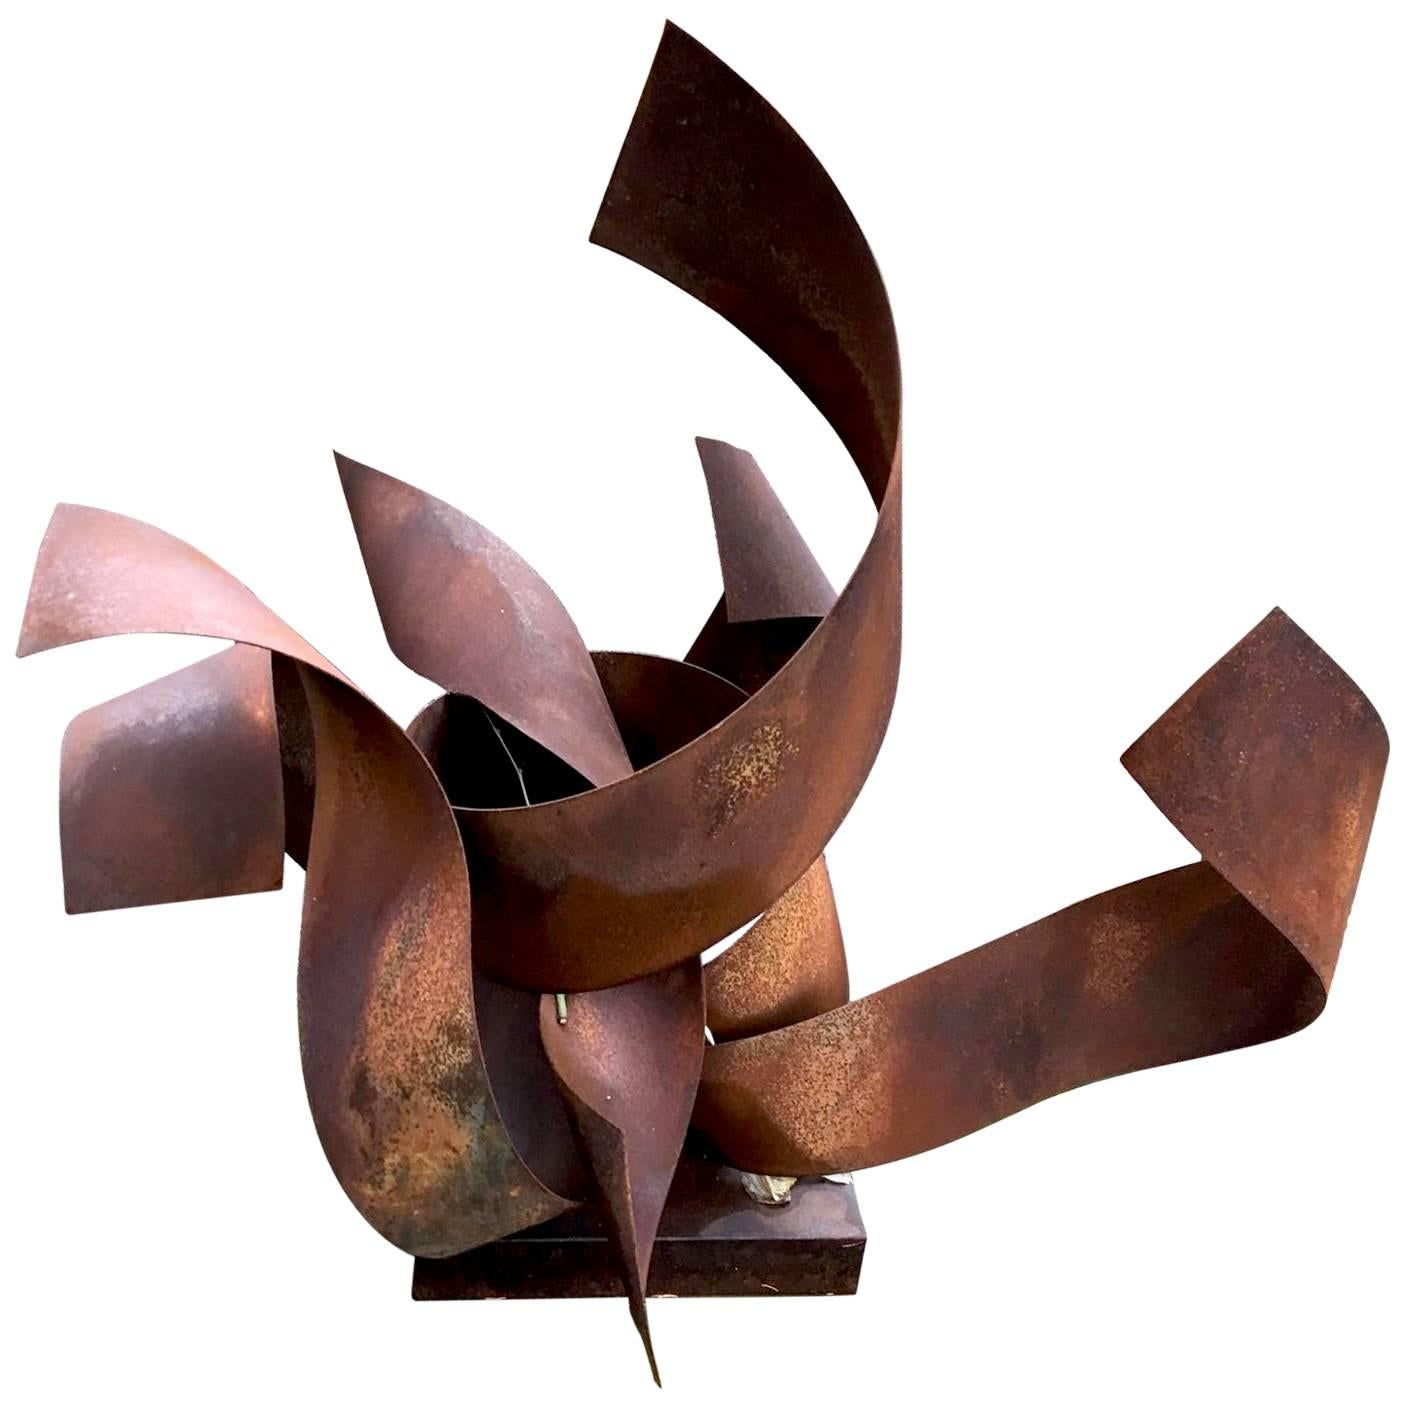 "Fire" Steel with Rust Patina Sculpture by Irwin Labin